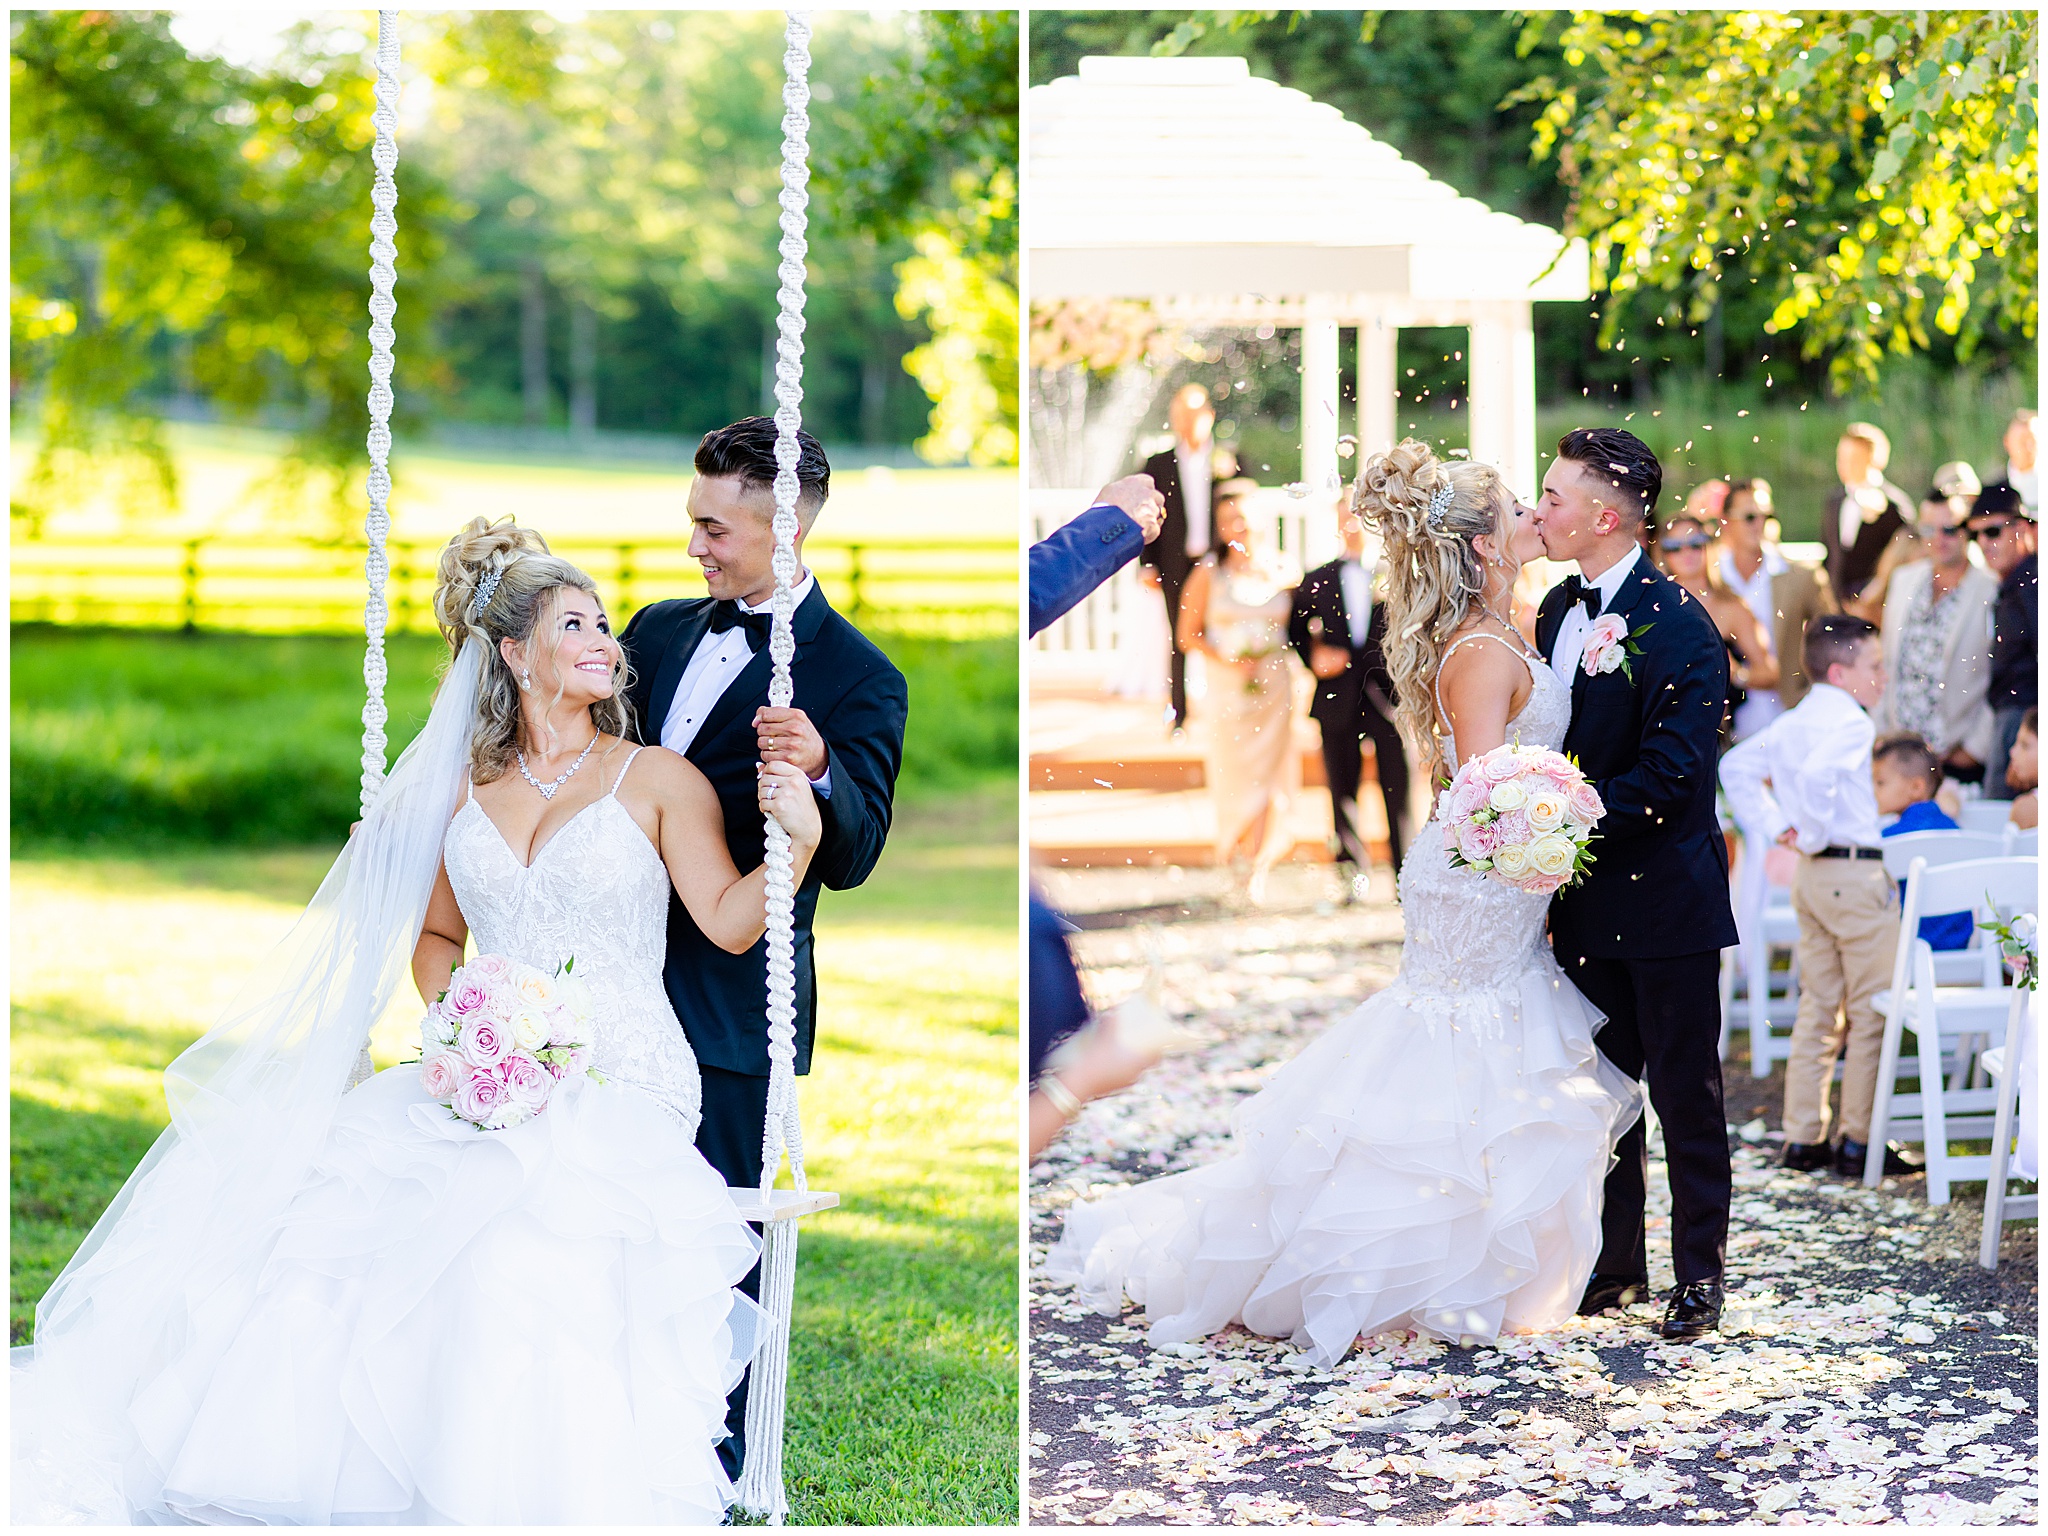 Newlyweds swing on a white swing and kiss in the aisle of their wedding while white petals are thrown around them by guests